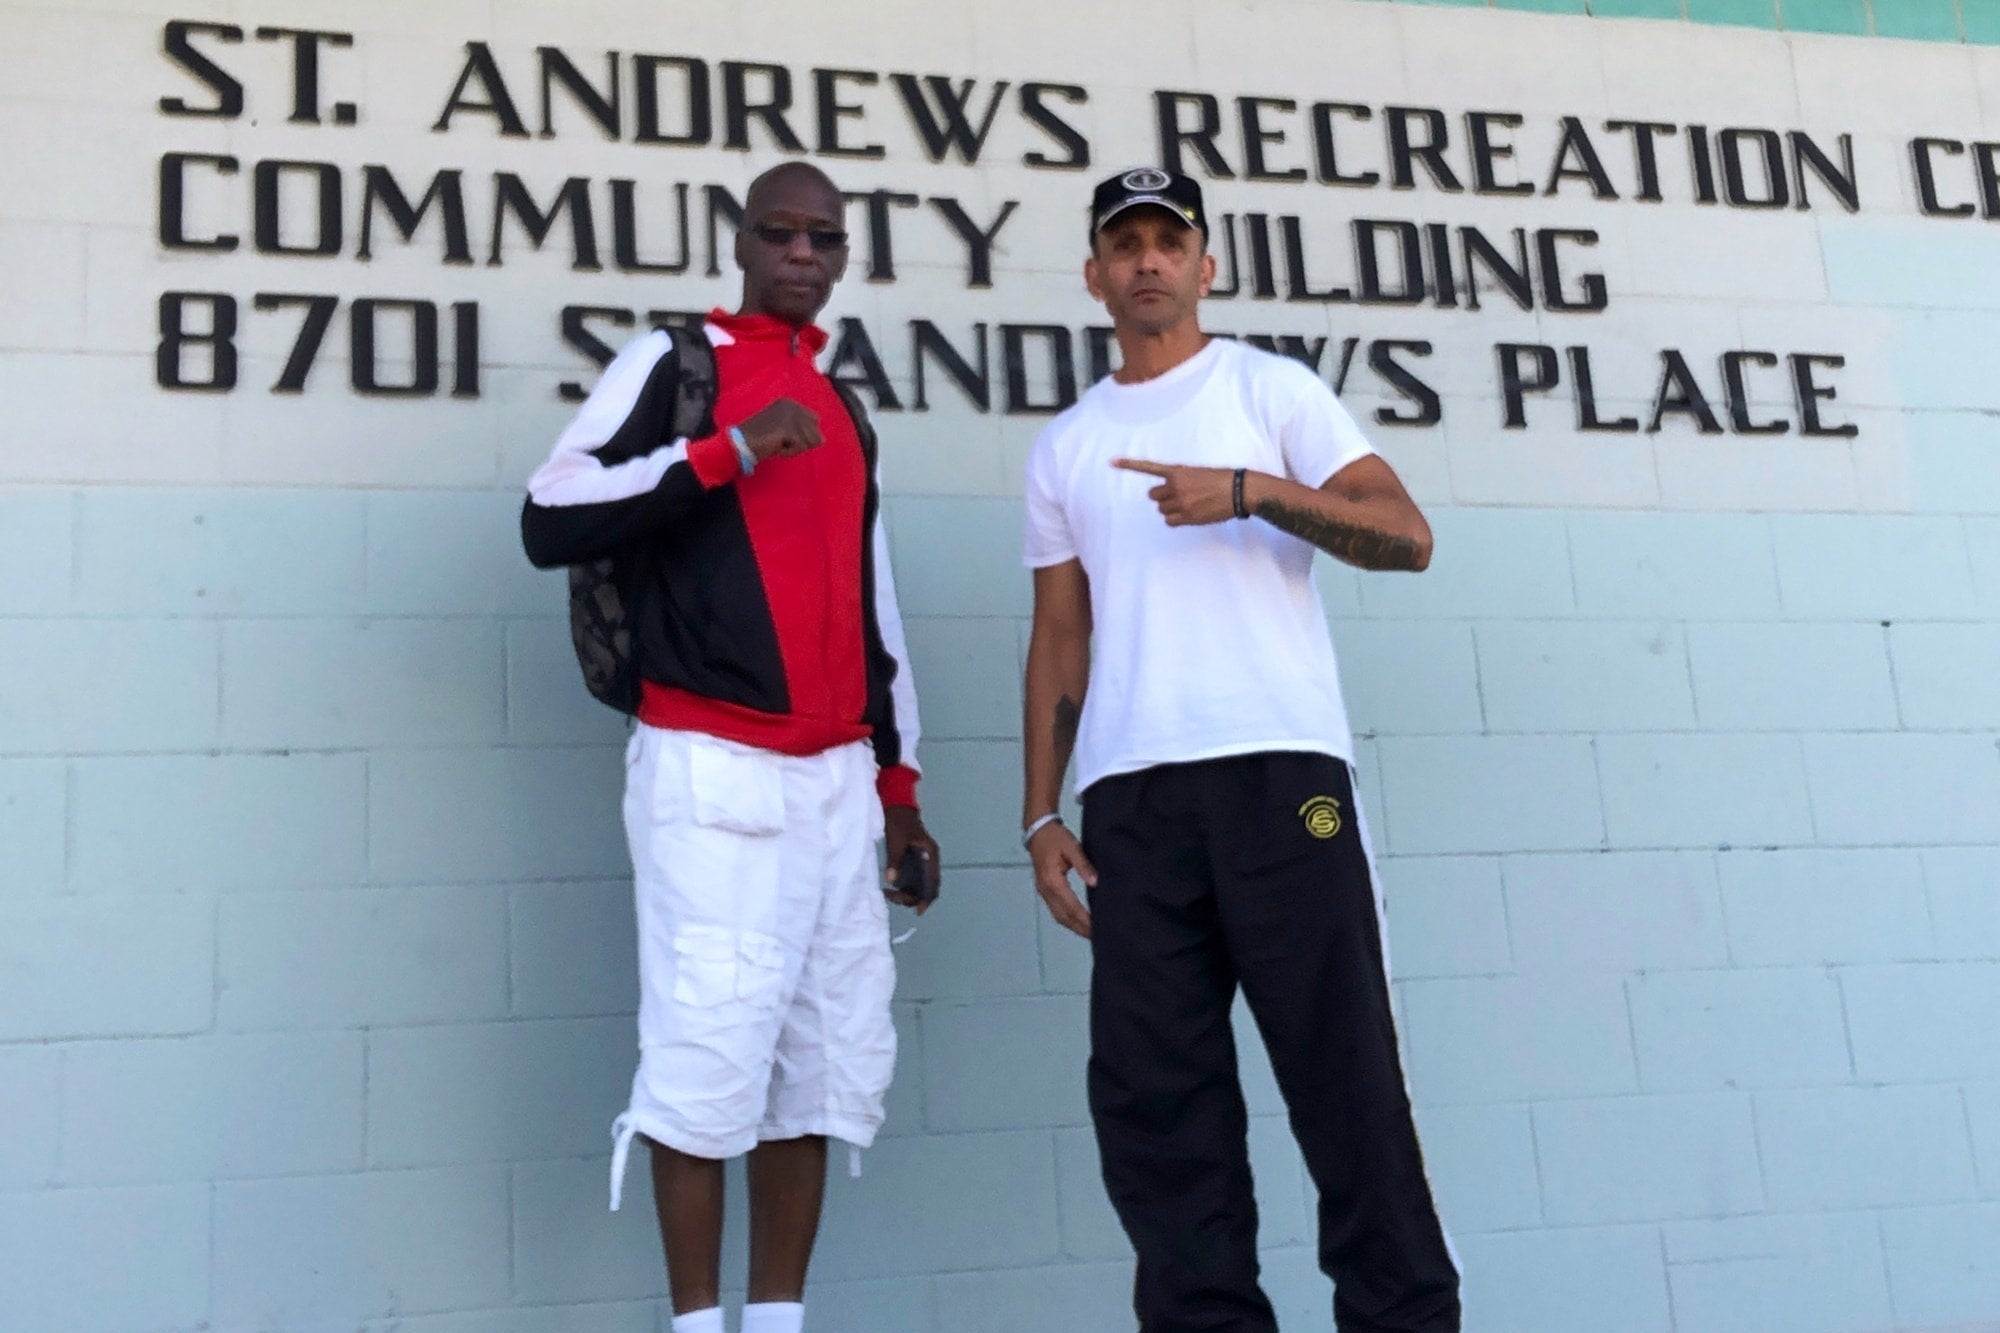 Two men stand in front of a sign that says St. Andrews Recreation Center Community Building.